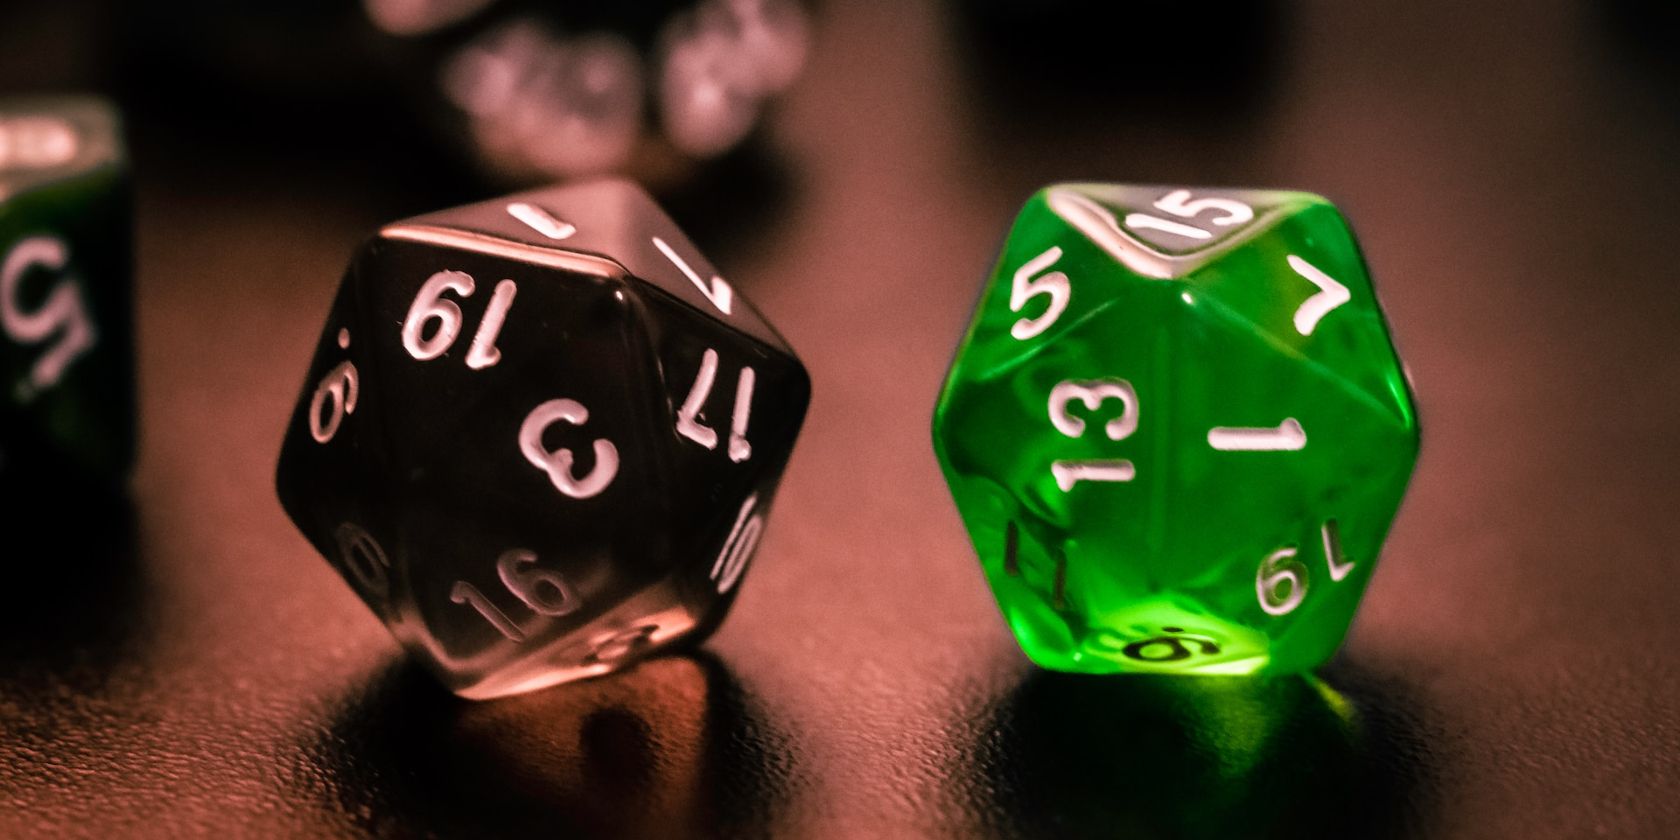 A black 20 sided die and a green 20 sided die side by side